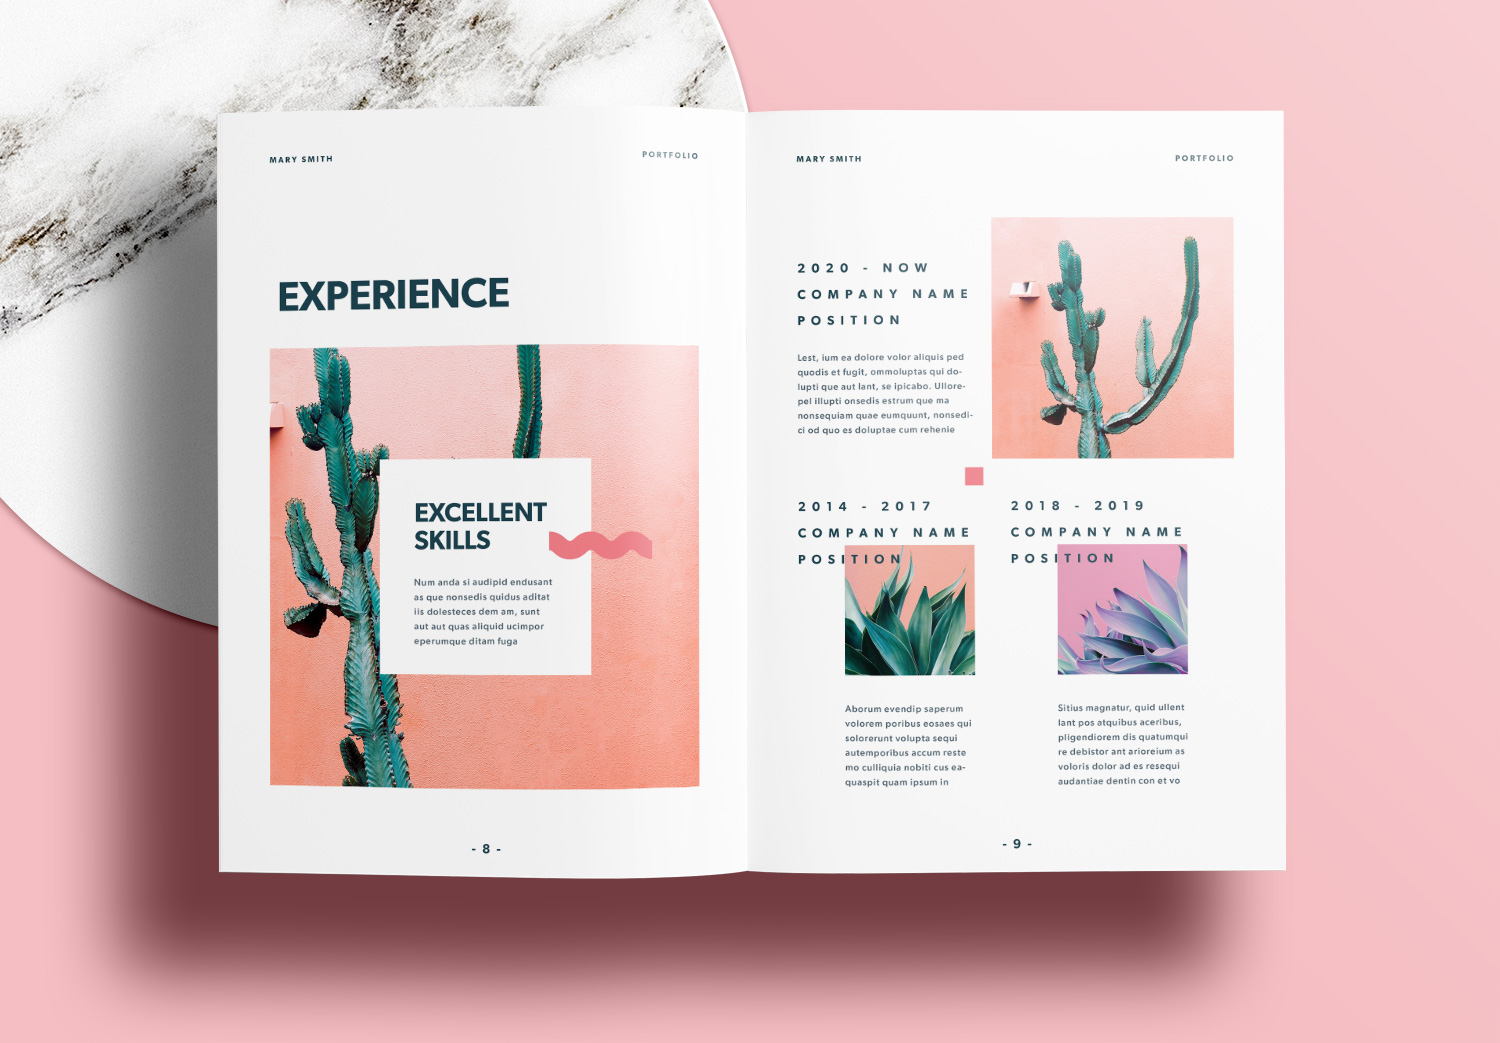 Free Portfolio Templates with Pink Accents